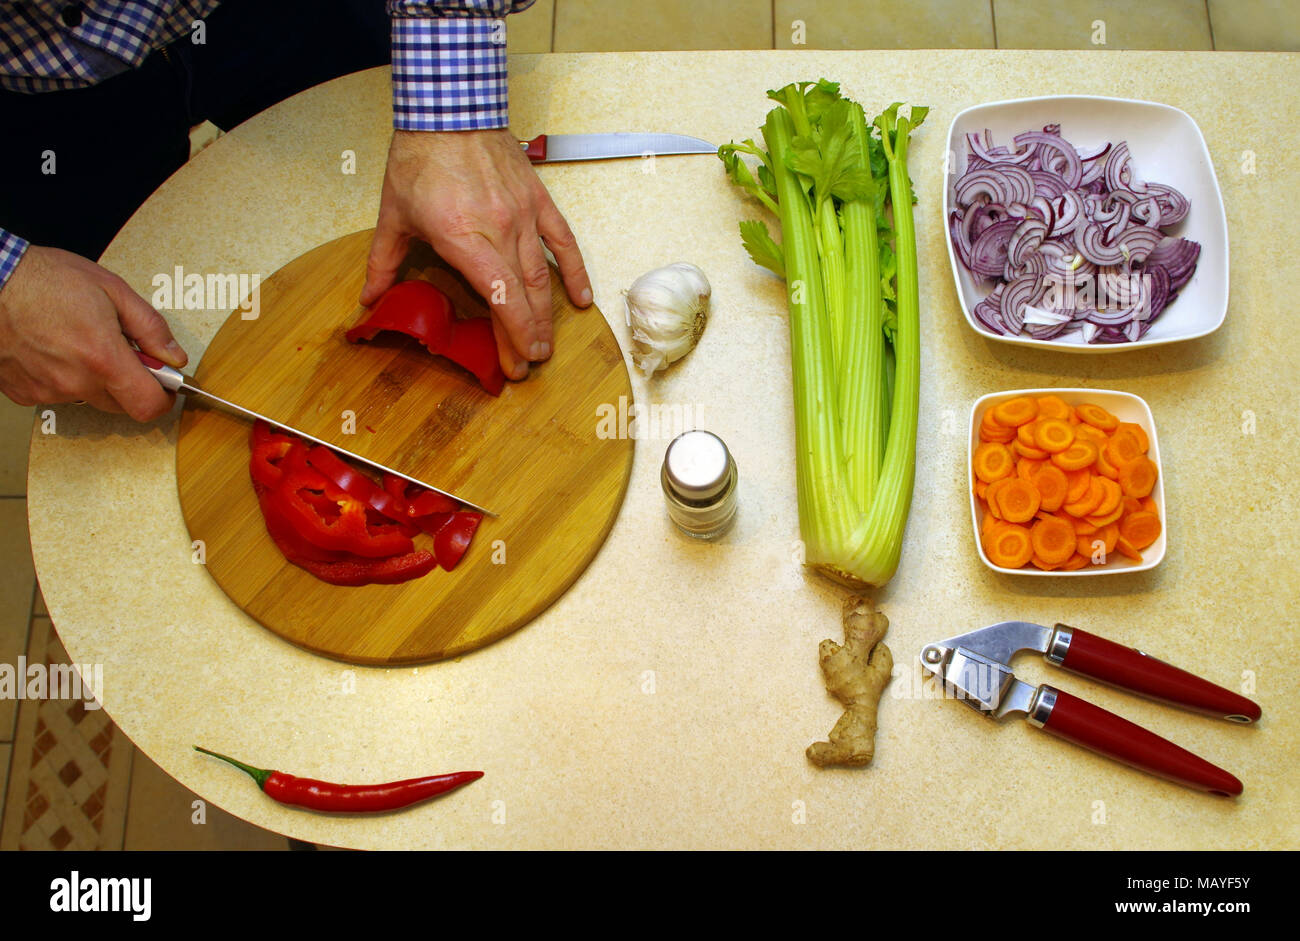 Vegetarian food cutting and preparing by man. View from top for board with vegetable nutrition. Stock Photo